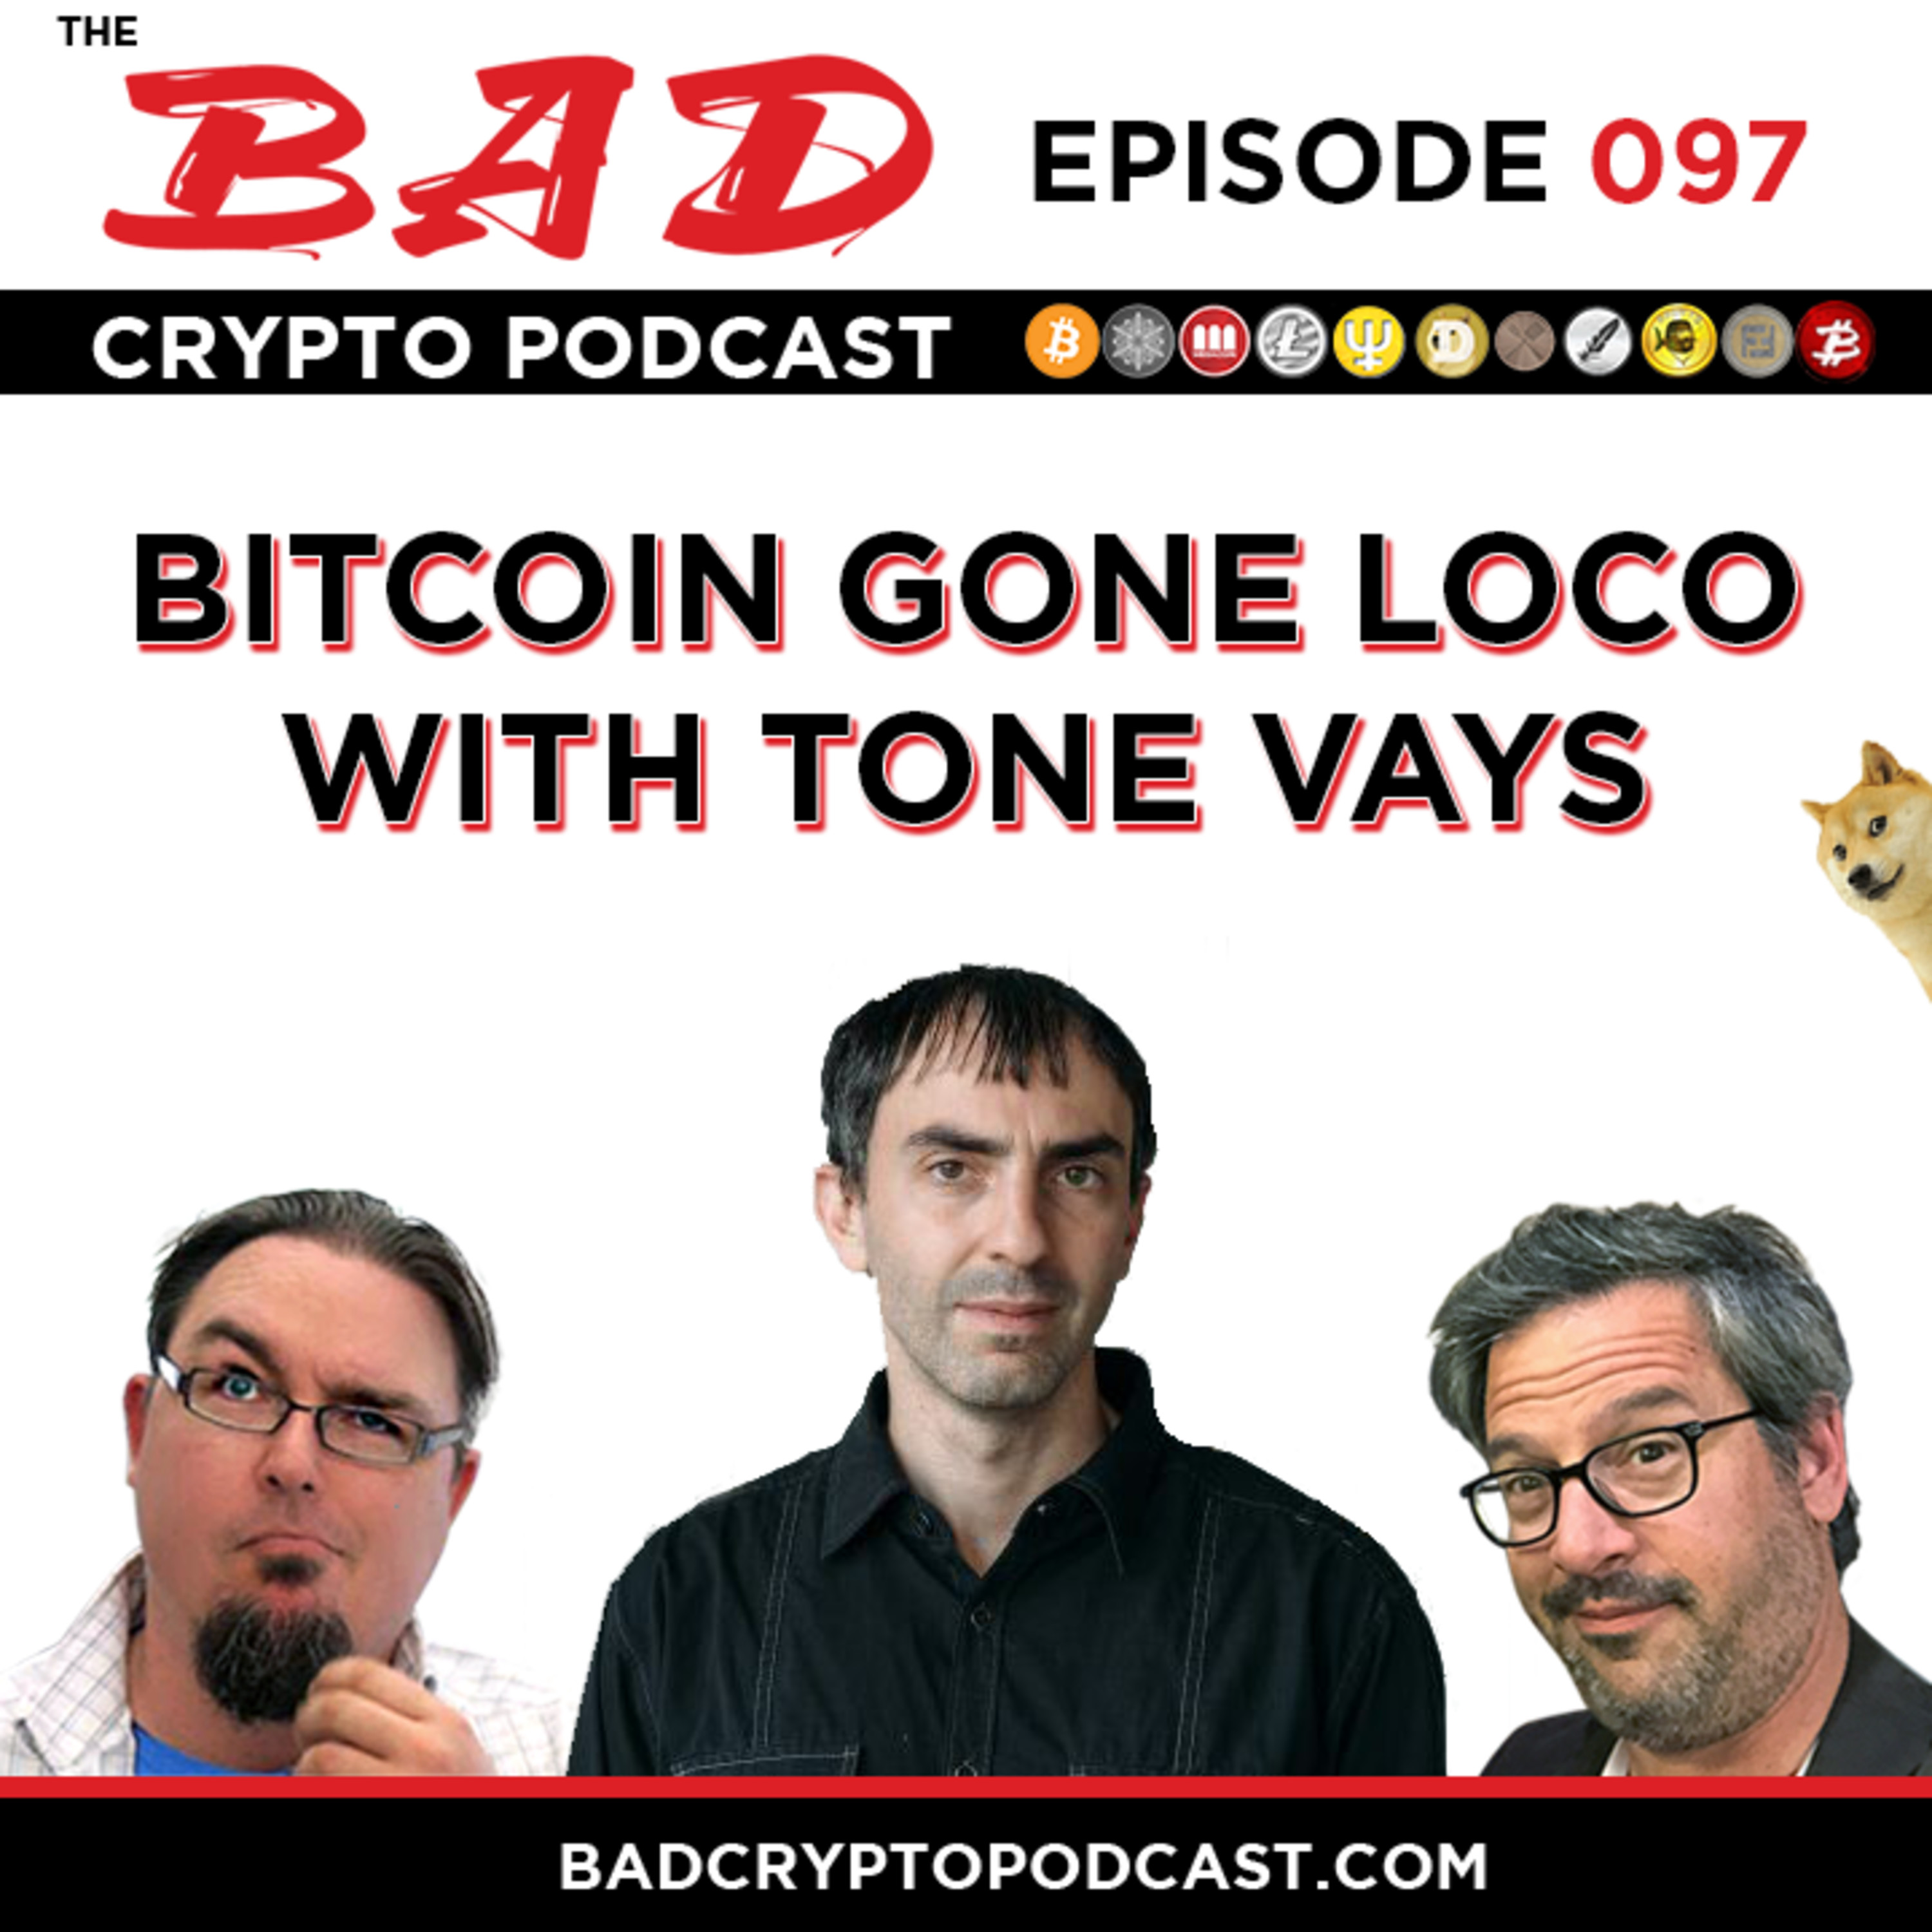 Bitcoin Gone Loco with Tone Vays